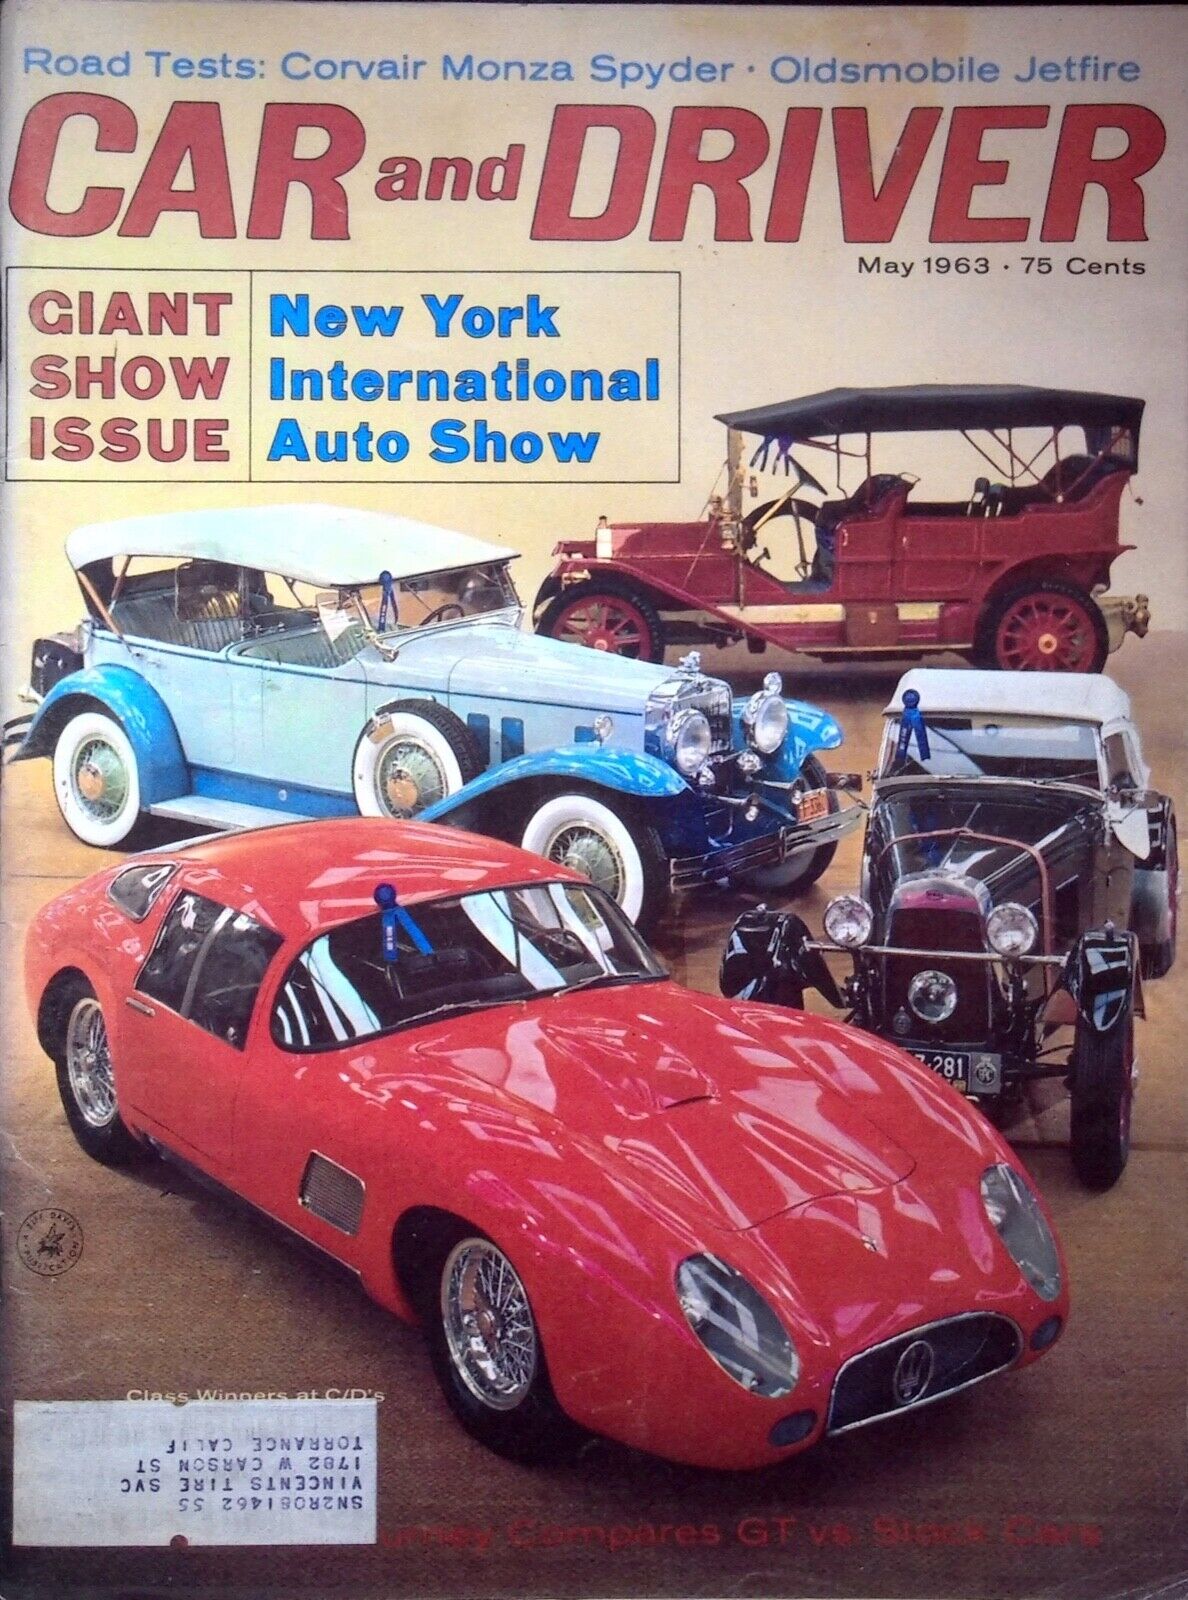 VINTAGE LA BARCHETTA - CAR AND DRIVER MAGAZINE, MAY 1963 VOLUME 8 NUMBER 11